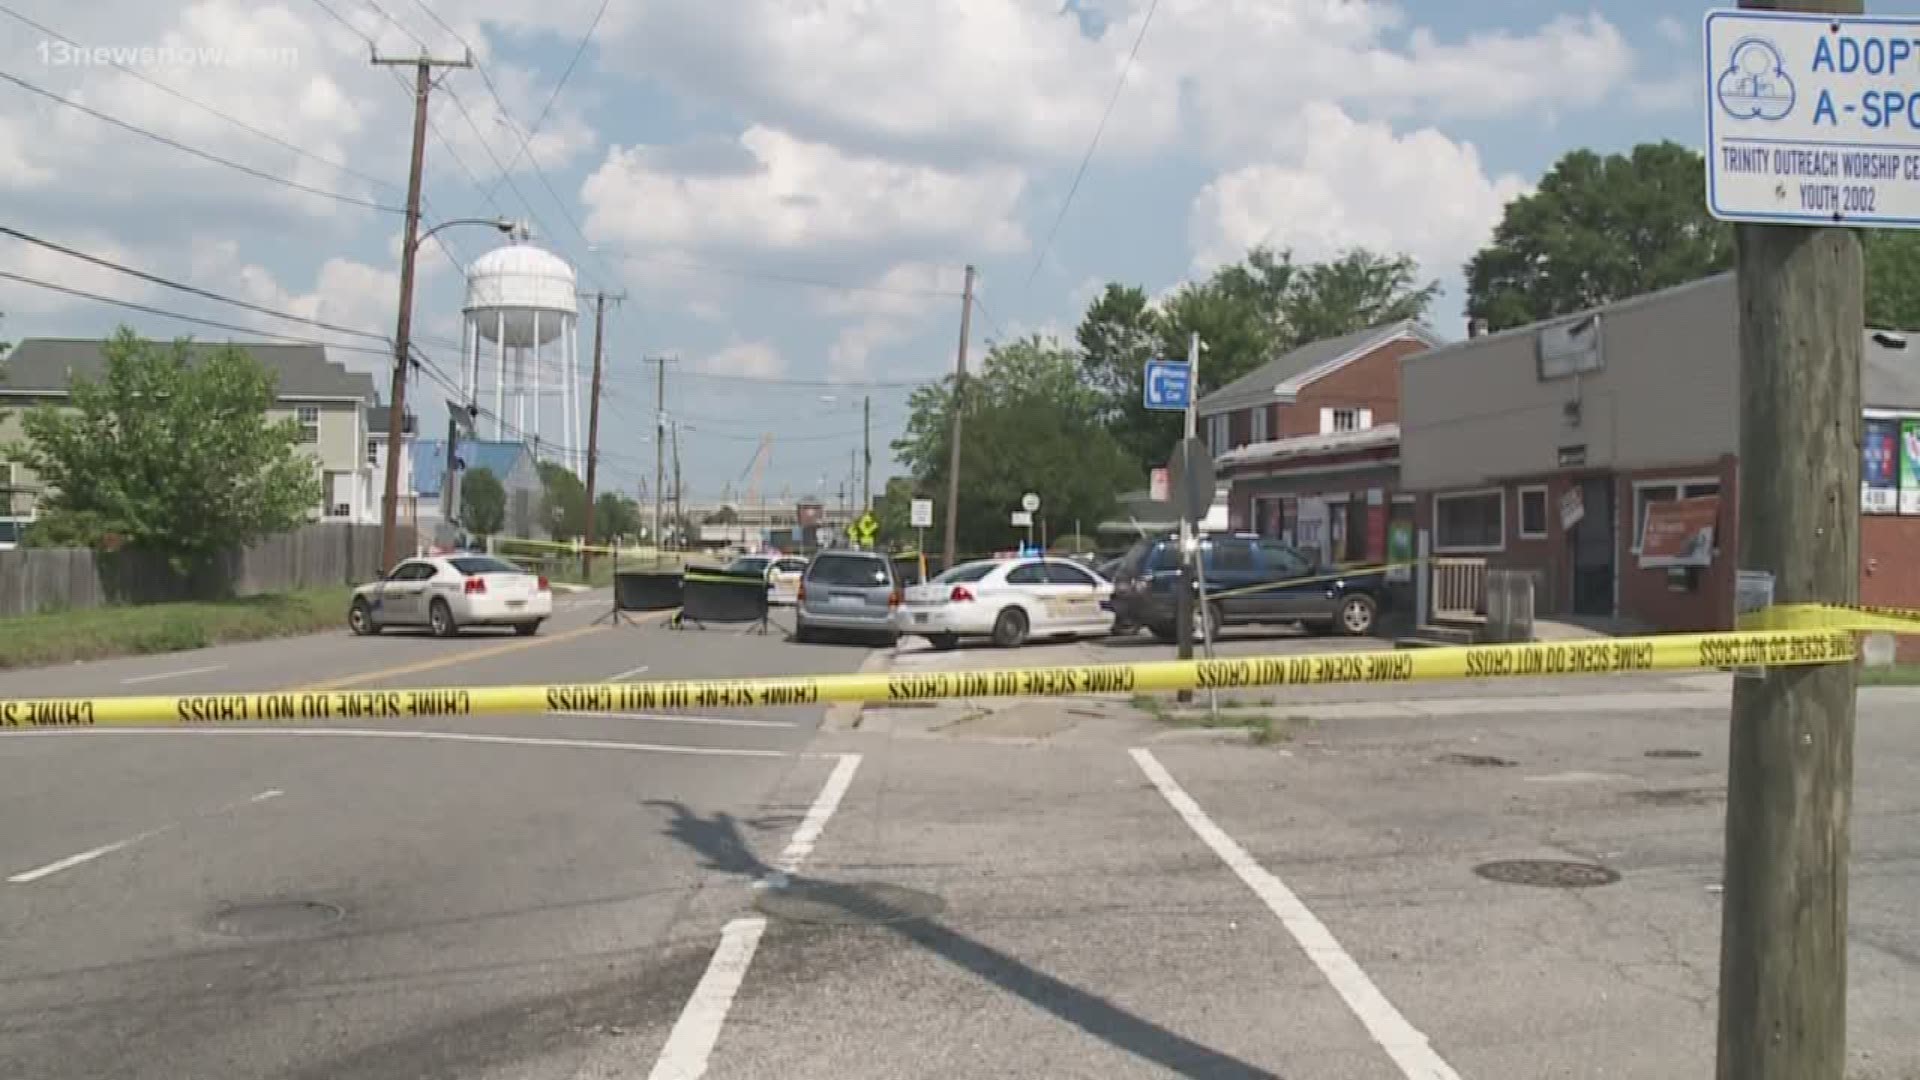 Police said the man was shot in the torso, and he was pronounced dead on the scene.